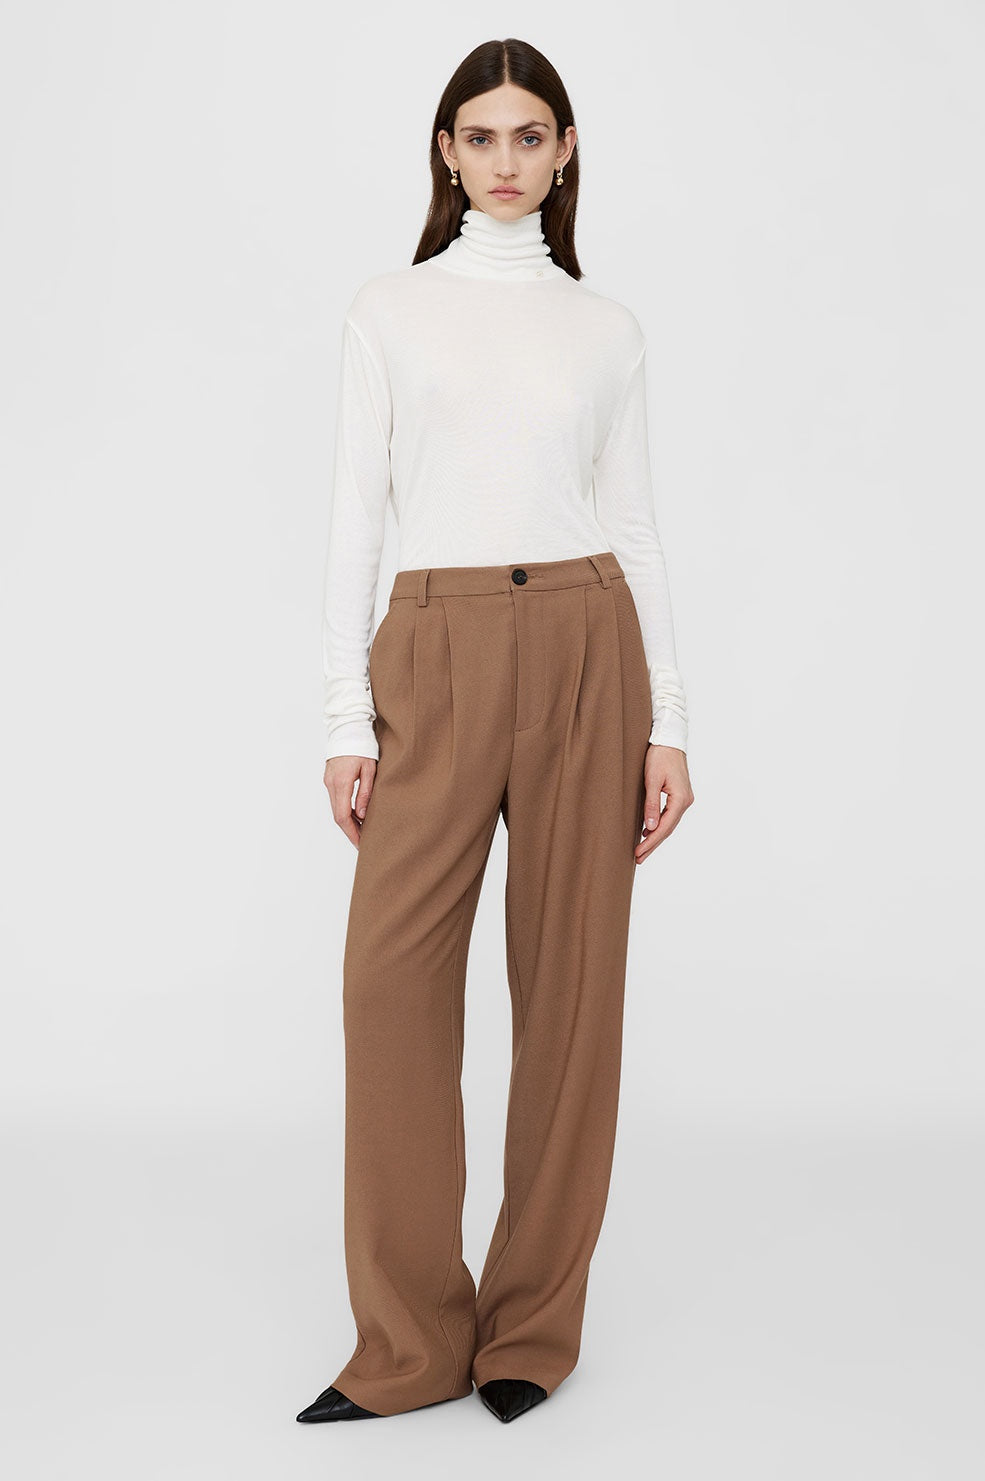 ANINE BING - CARRIE PANT CAMEL TWILL WAS $649